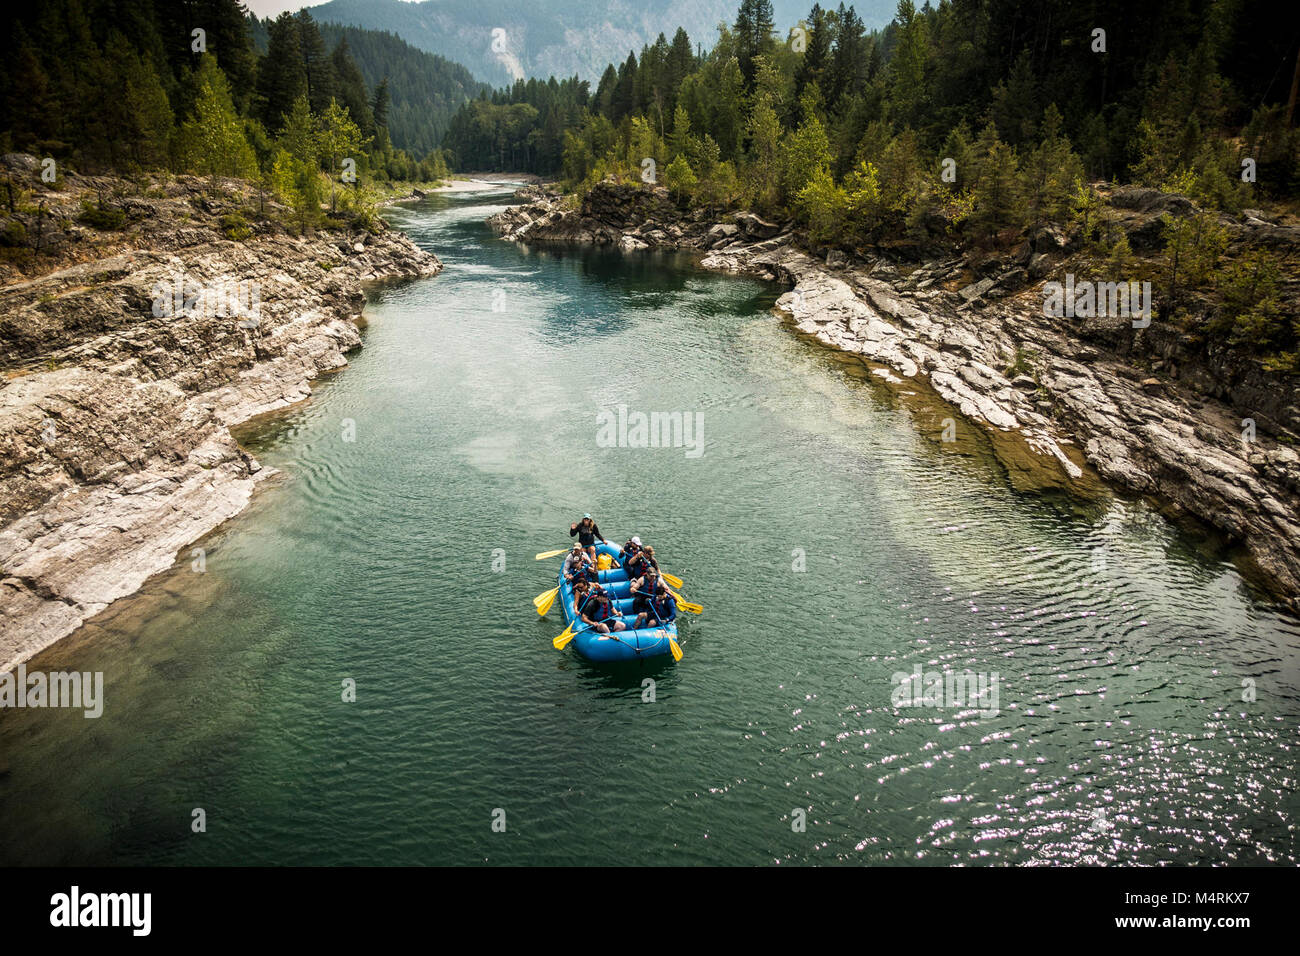 Rafting on Middle Fork of the Flathead River..Rafting on Middle Fork of the Flathead River. Stock Photo